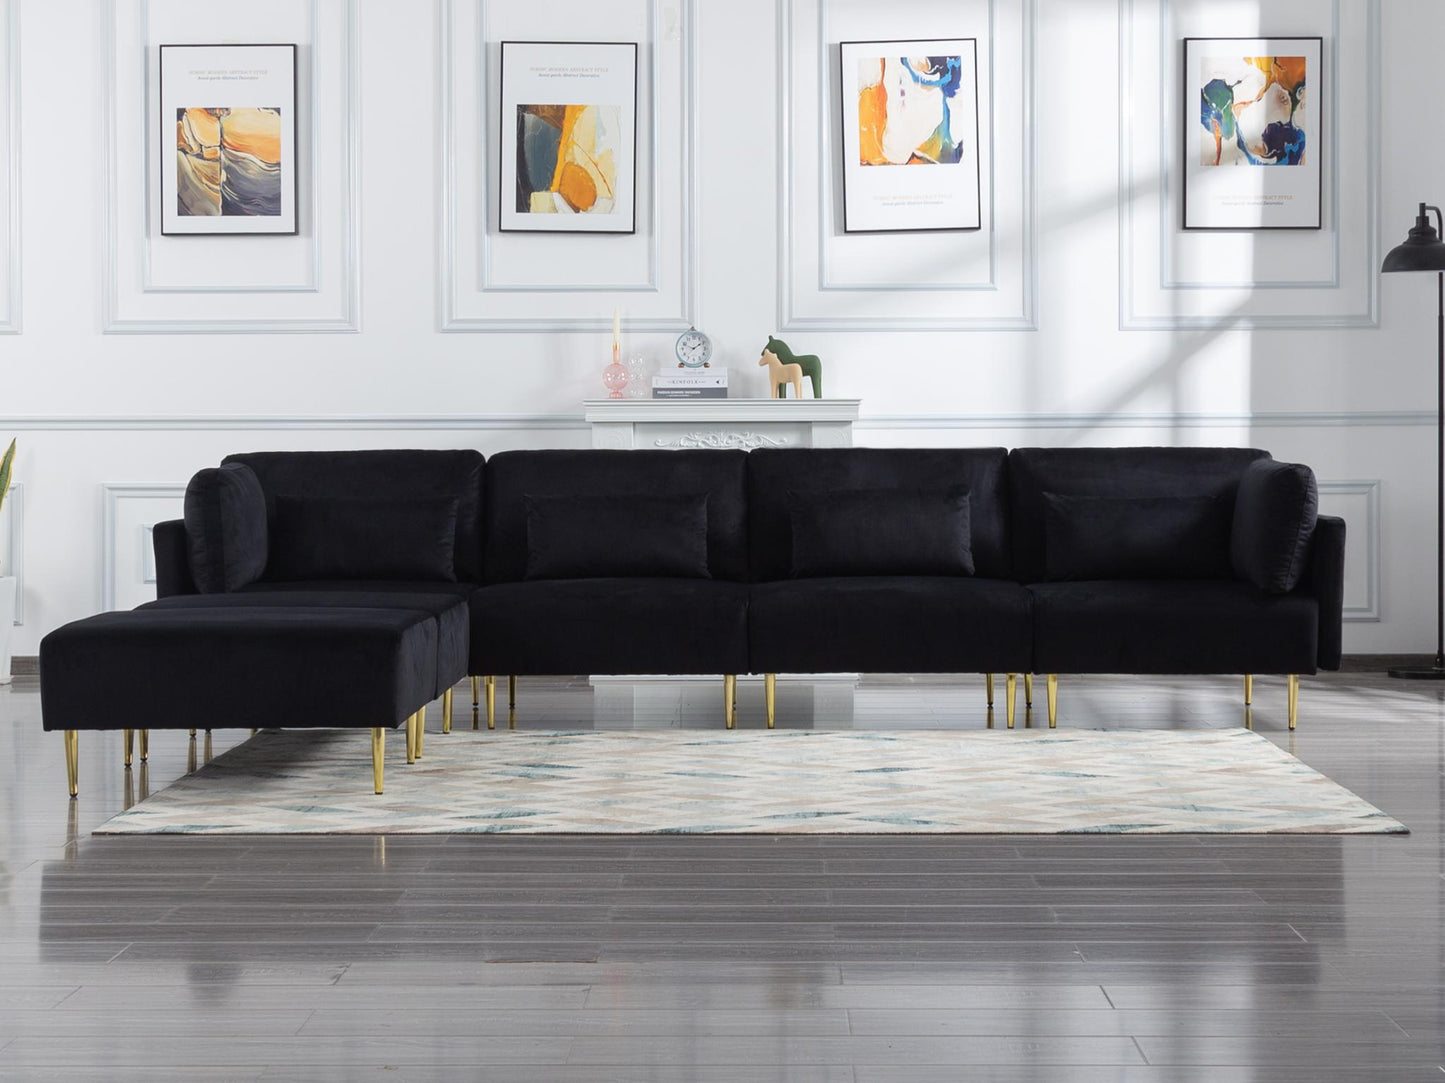 LAST™  Sectional Sofa with ottoman